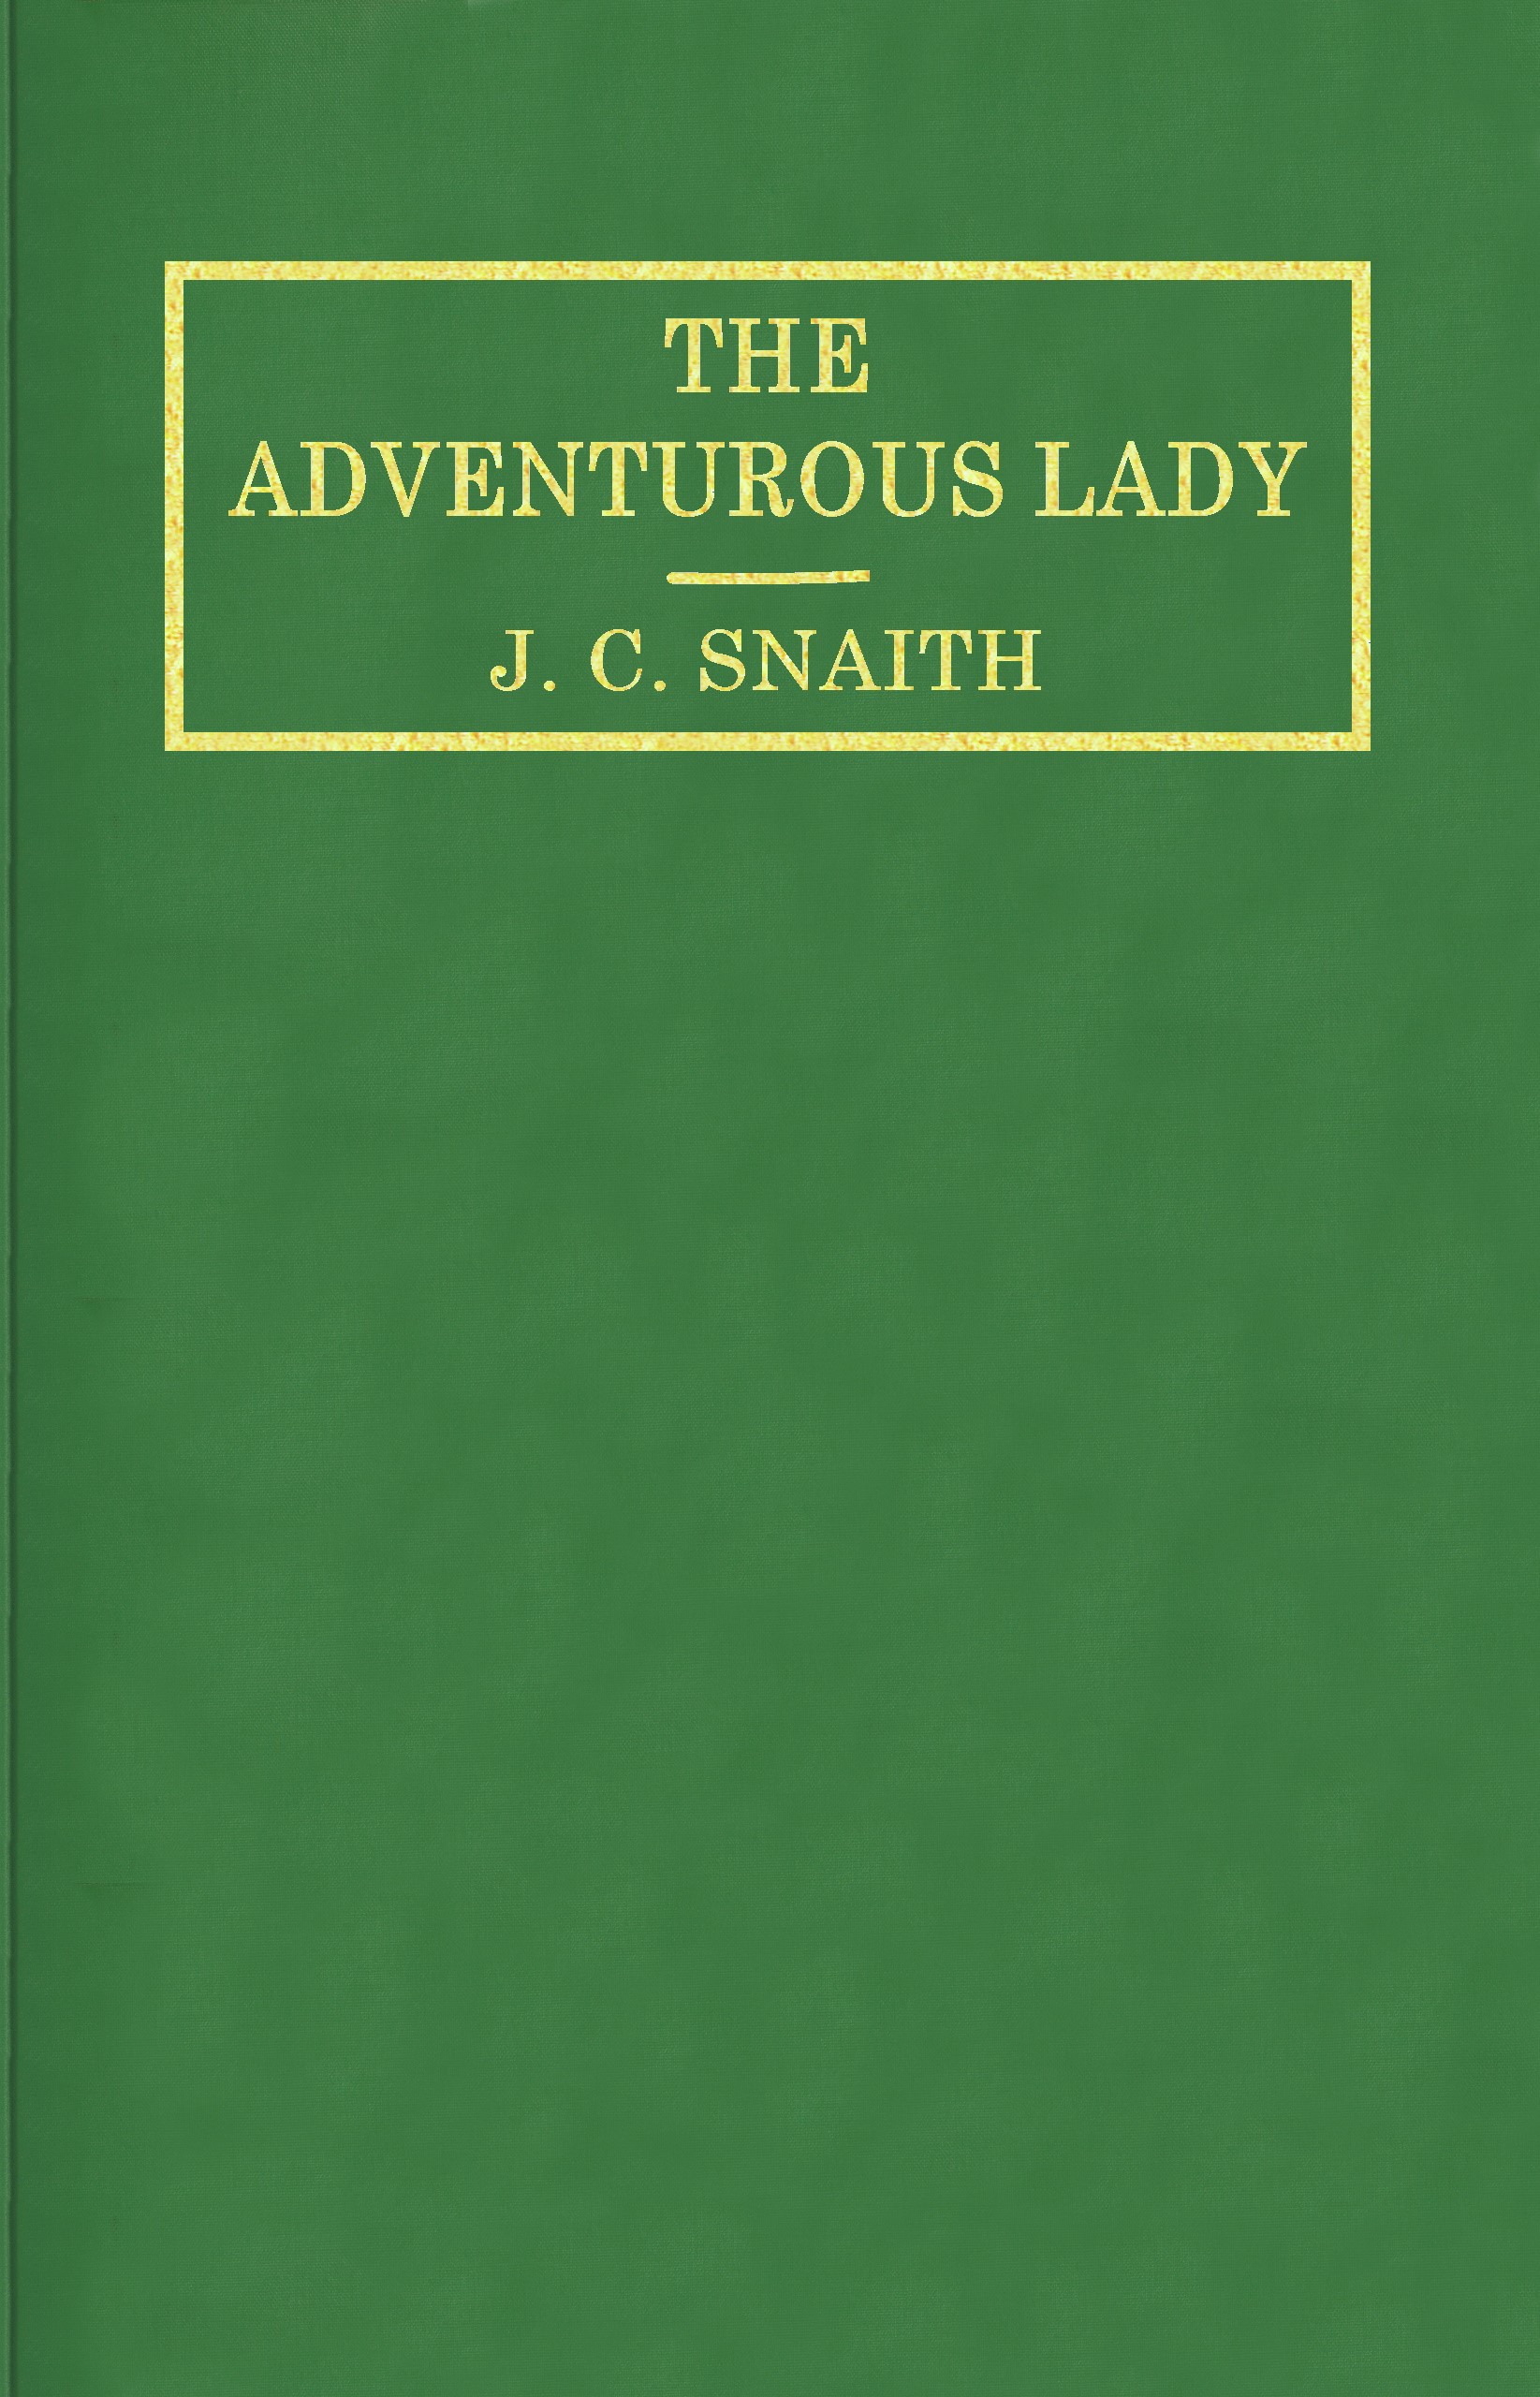 The Adventurous Lady, by J image pic